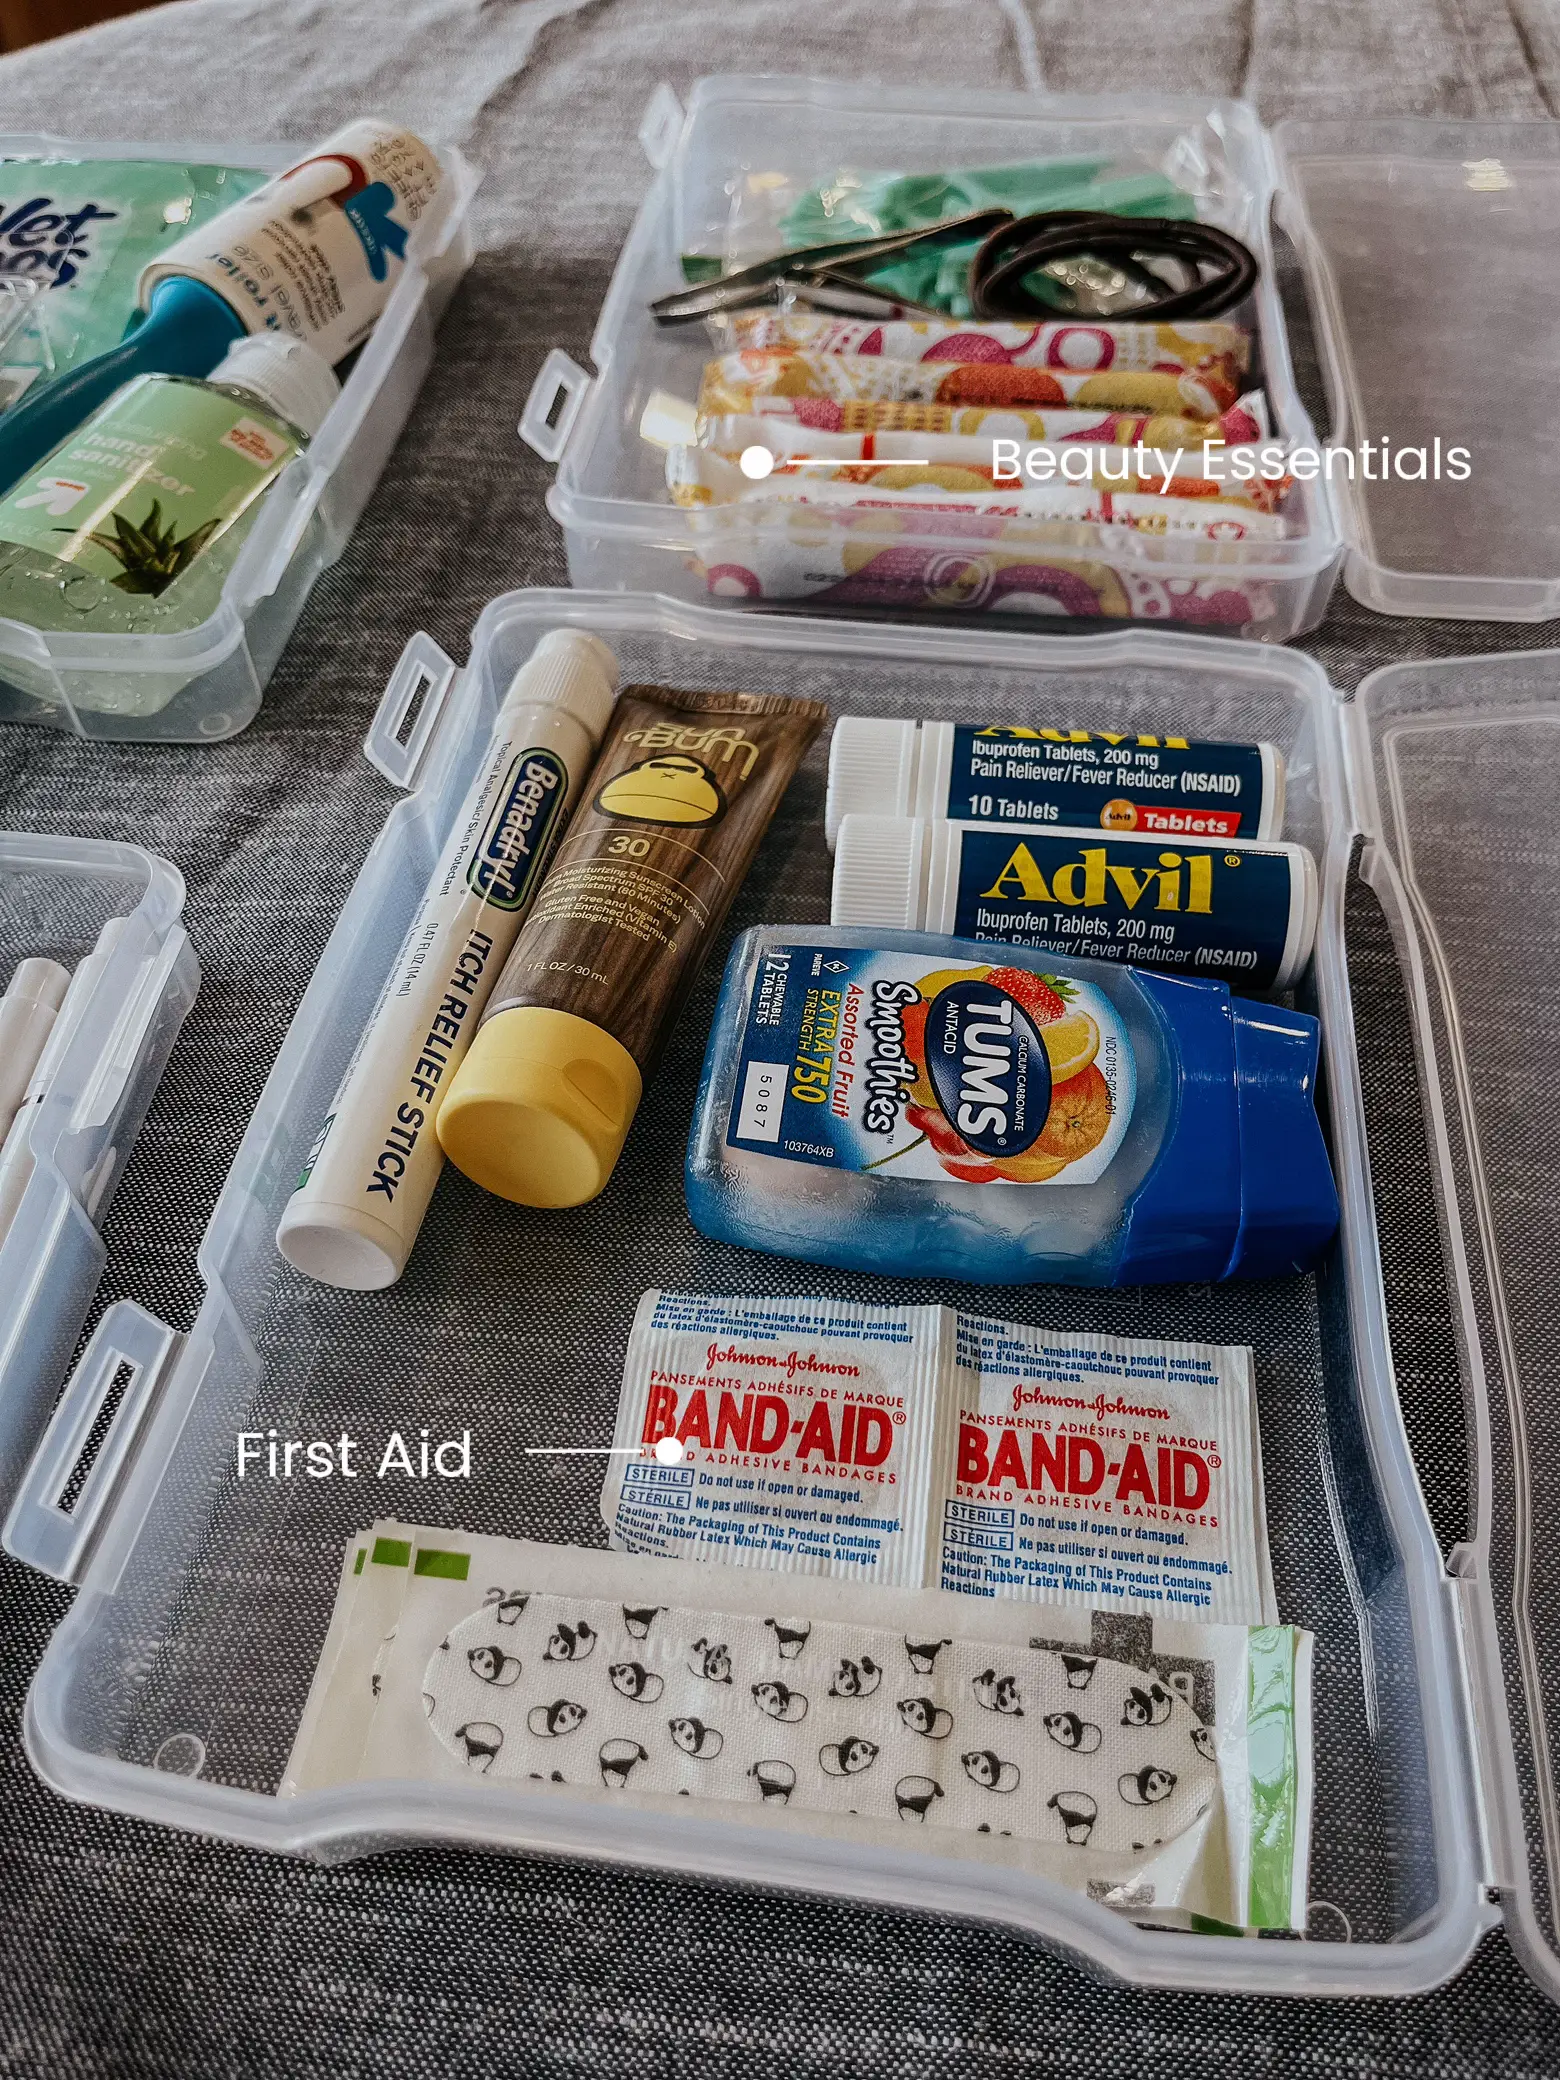 Sarah with an H: Every House Needs This  Diy first aid kit, Emergency kit,  First aid kit